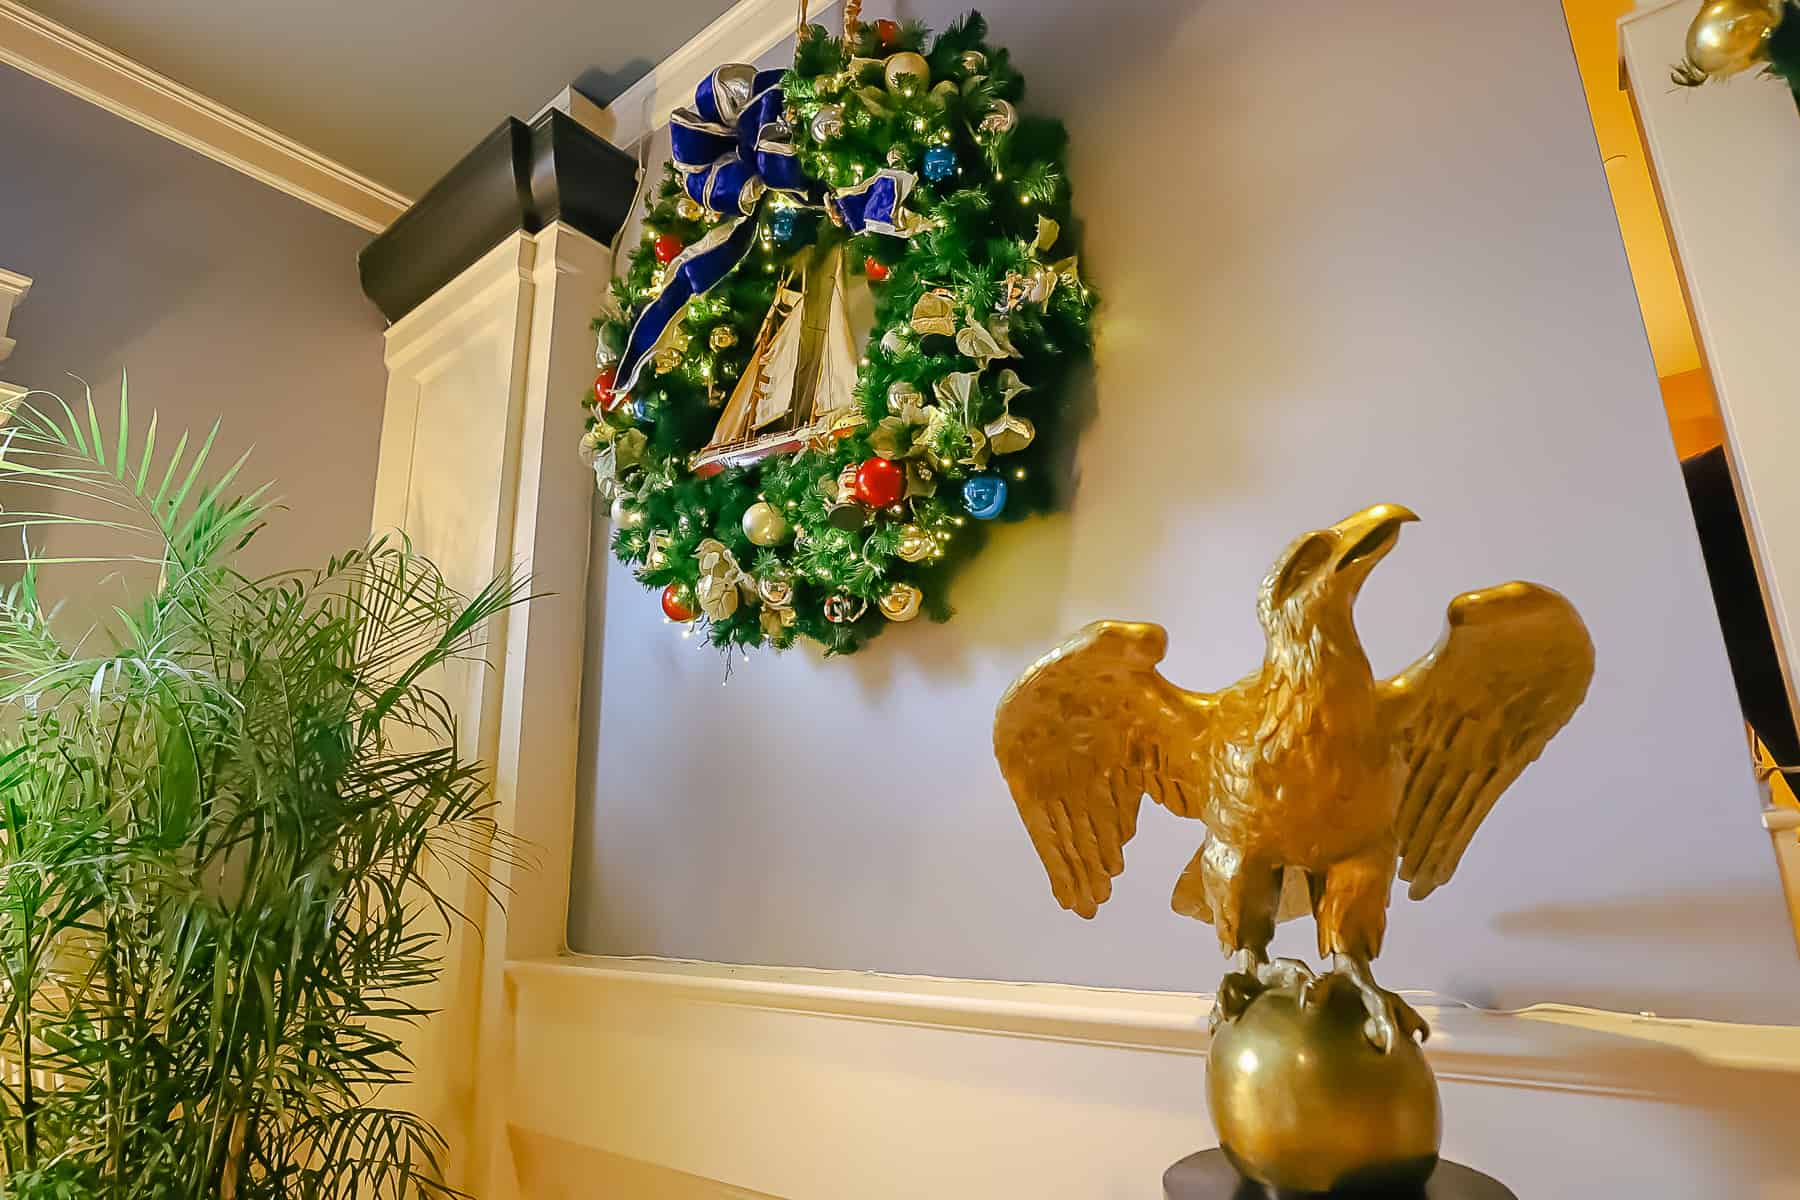 a statue of an eagle next to a Christmas wreath